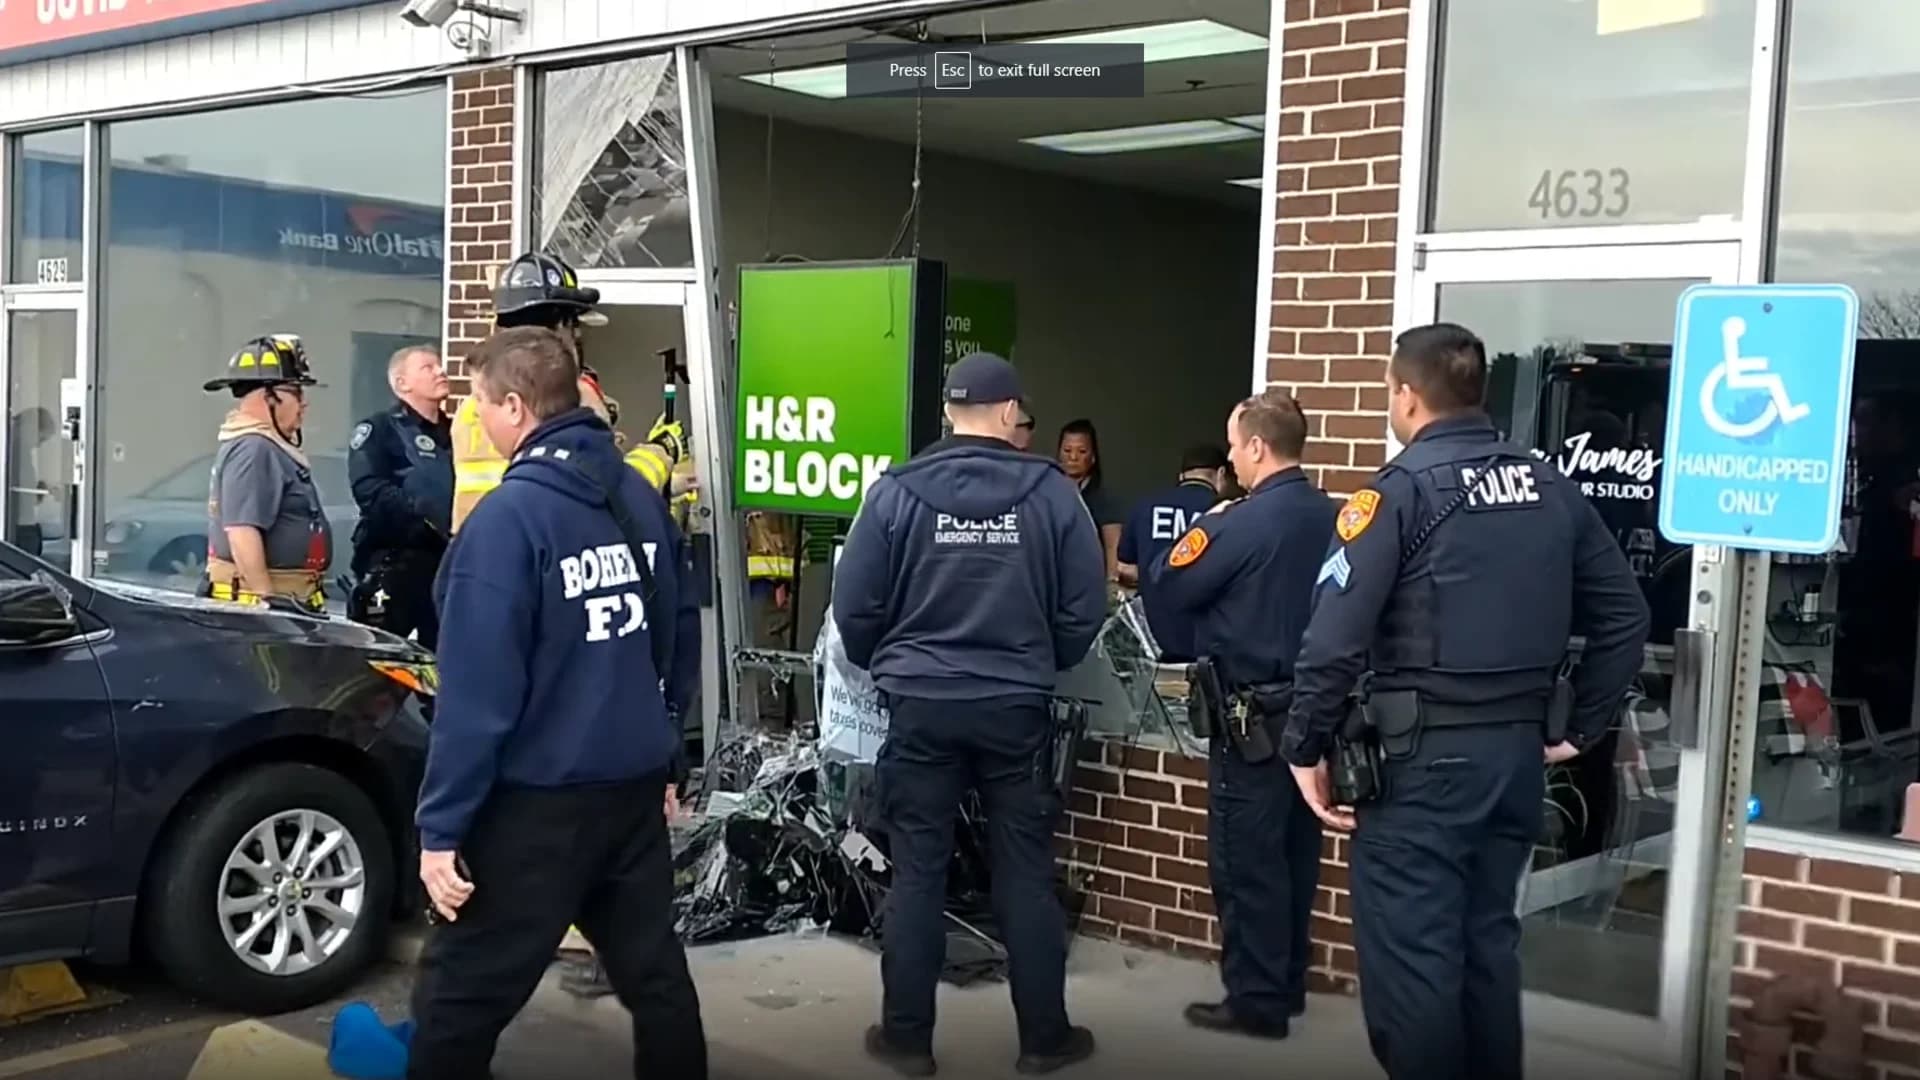 Police: 2 injured after woman drives SUV into H&R Block in Bohemia